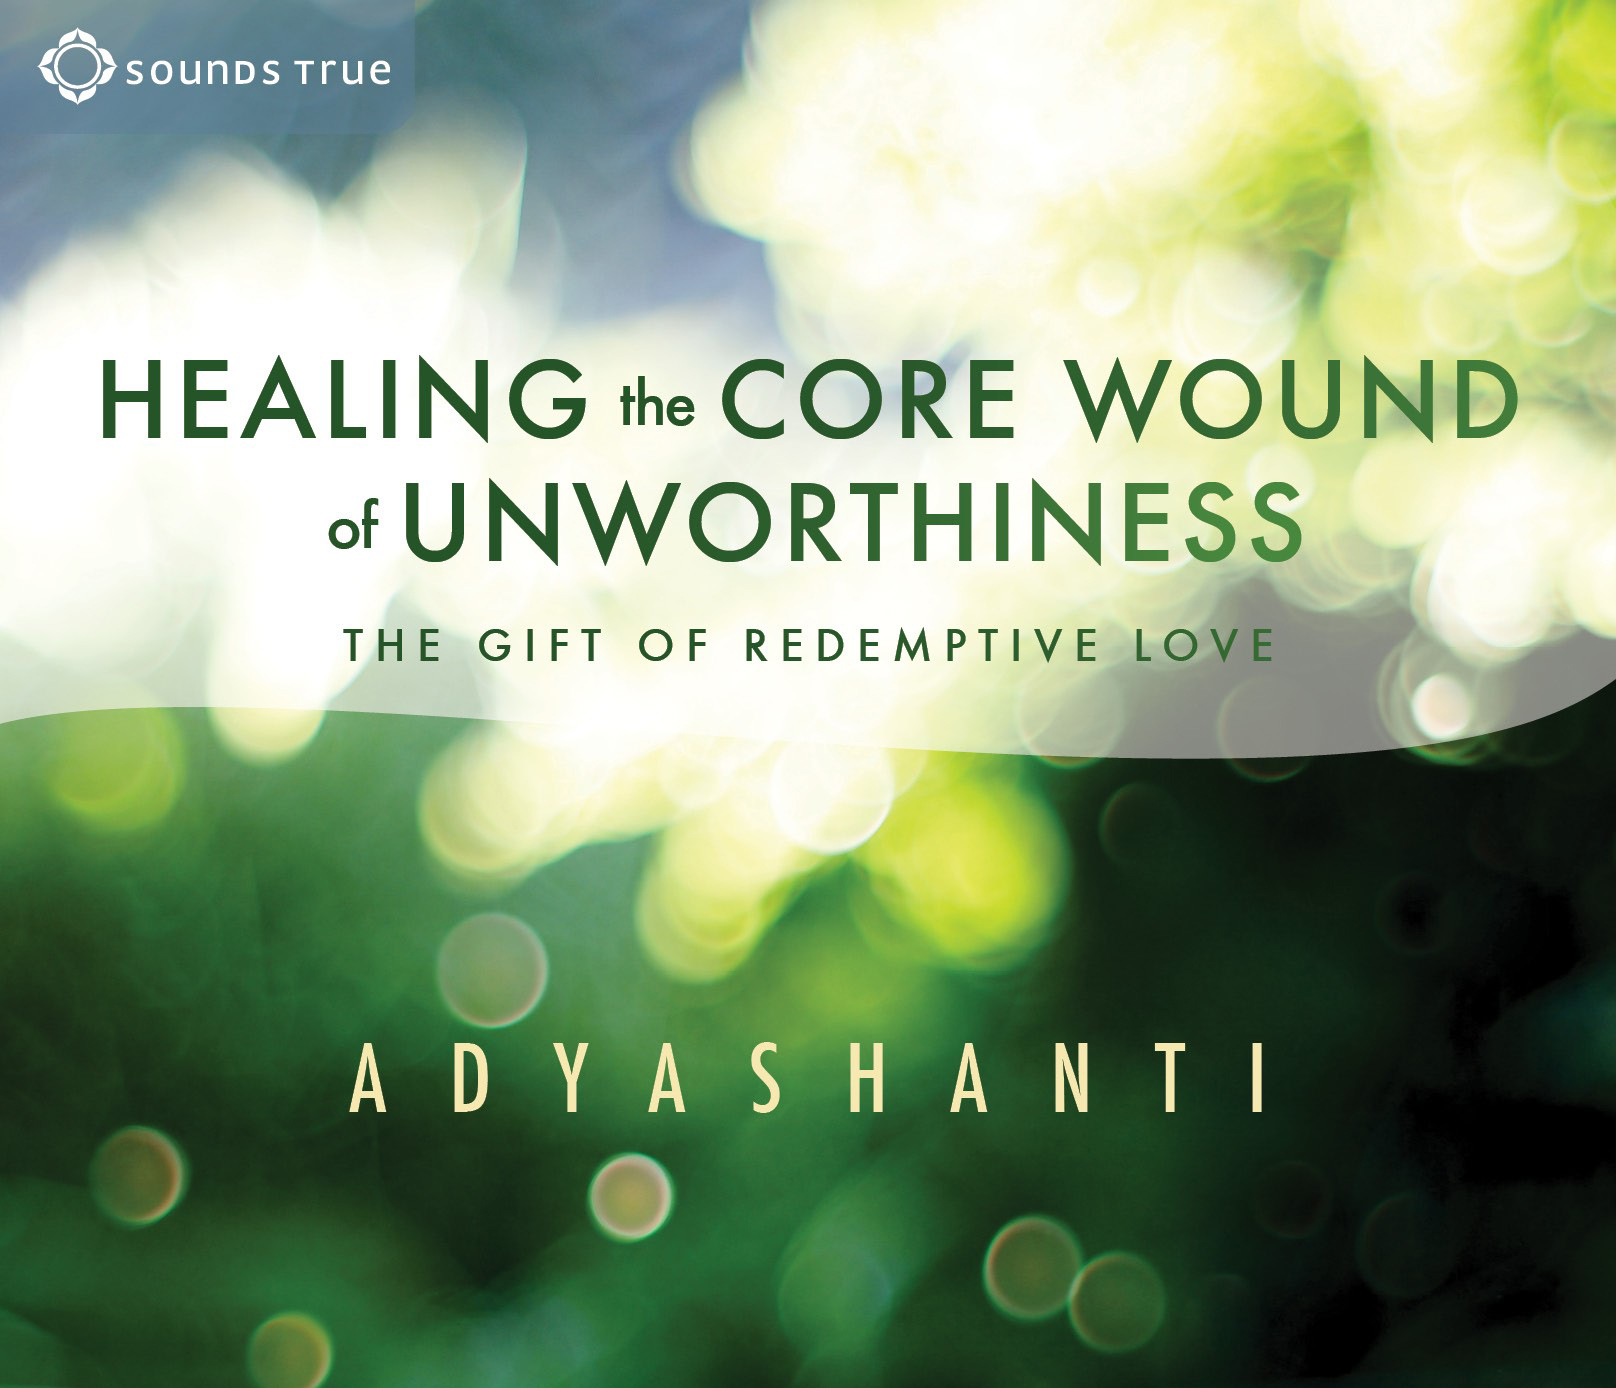 CD: Healing the Core Wound of Unworthiness, 2 CDs